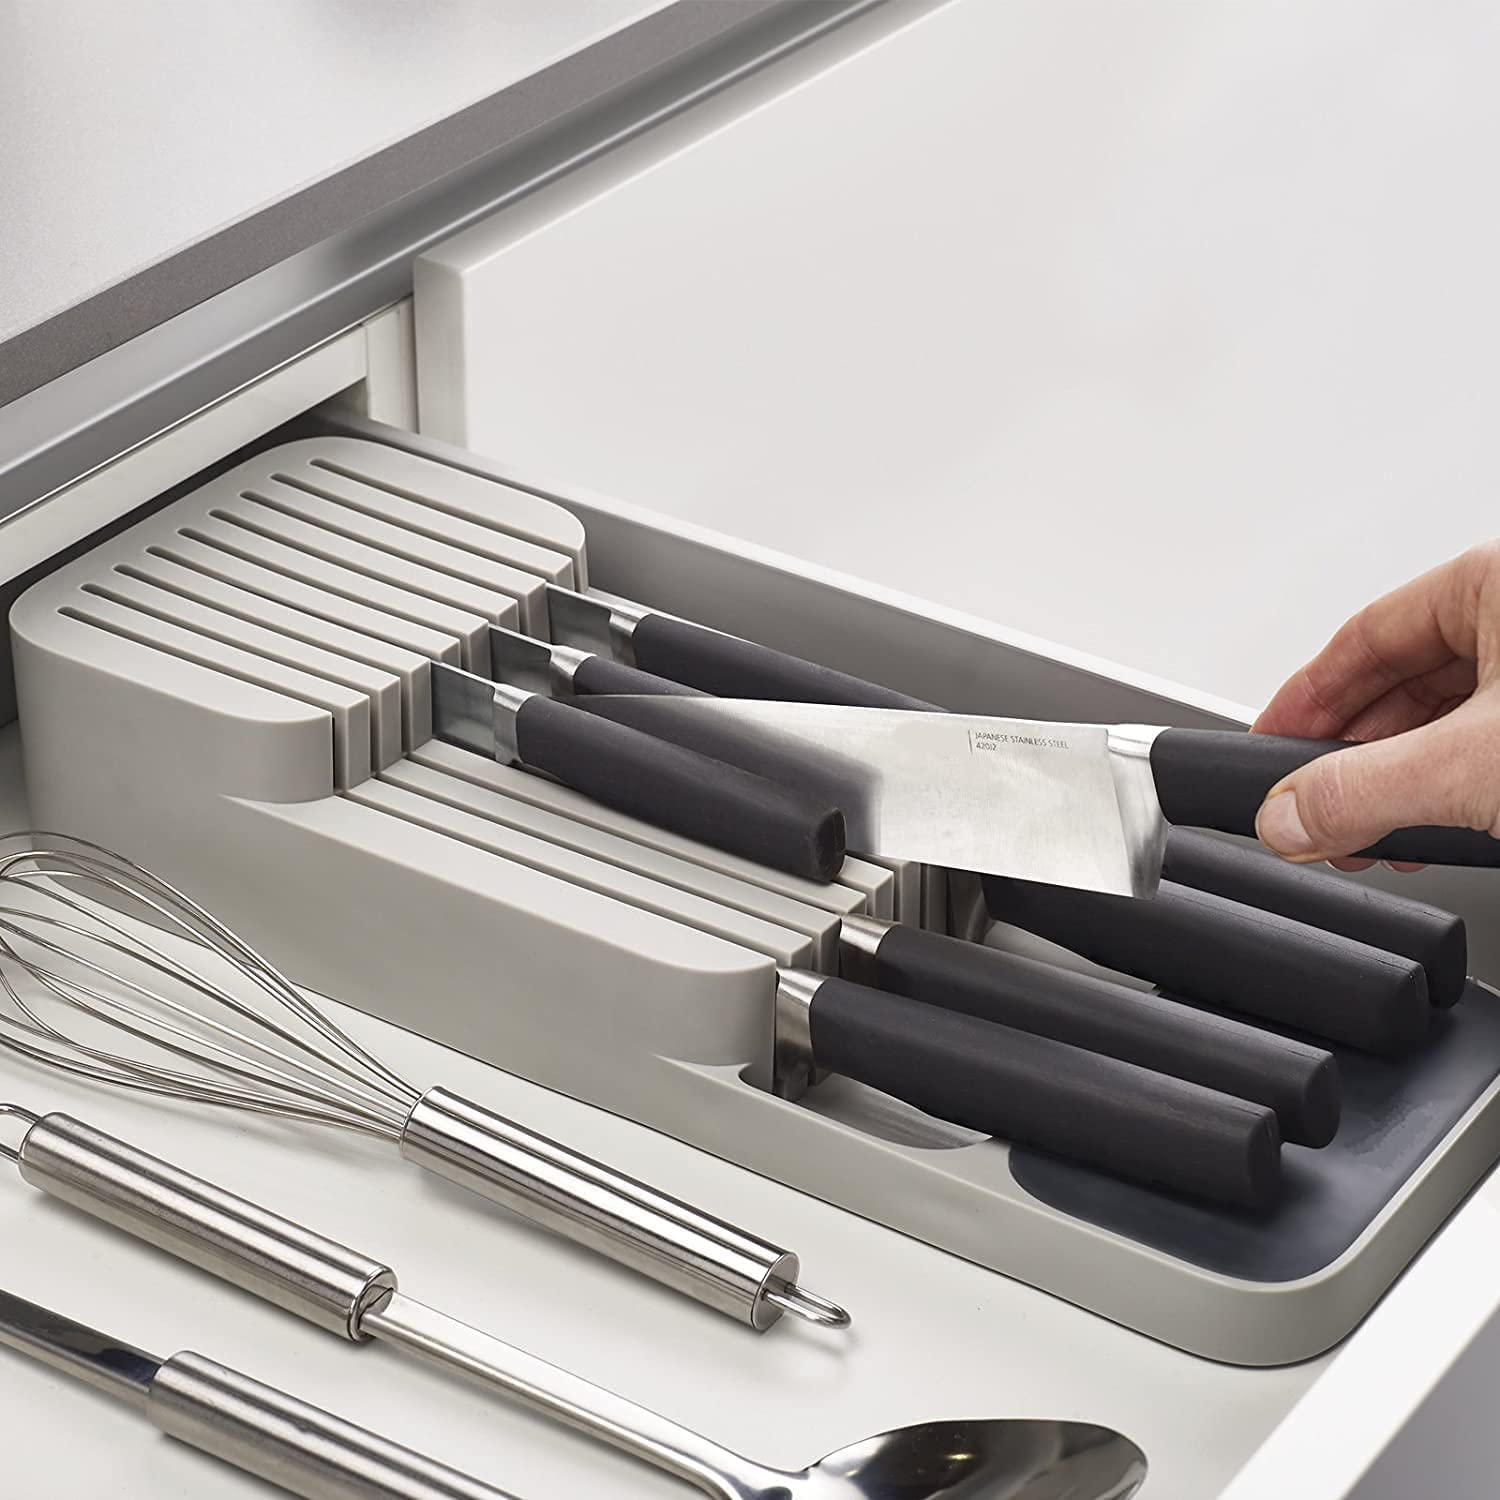 M.A.D. for Everything, Kitchen Drawer Knife Storage Tray, Knife Holder, Knife Block Organiser, Space Saver in Your Cabinet Cupboard Store Drawer - by M.A.D. for Everything